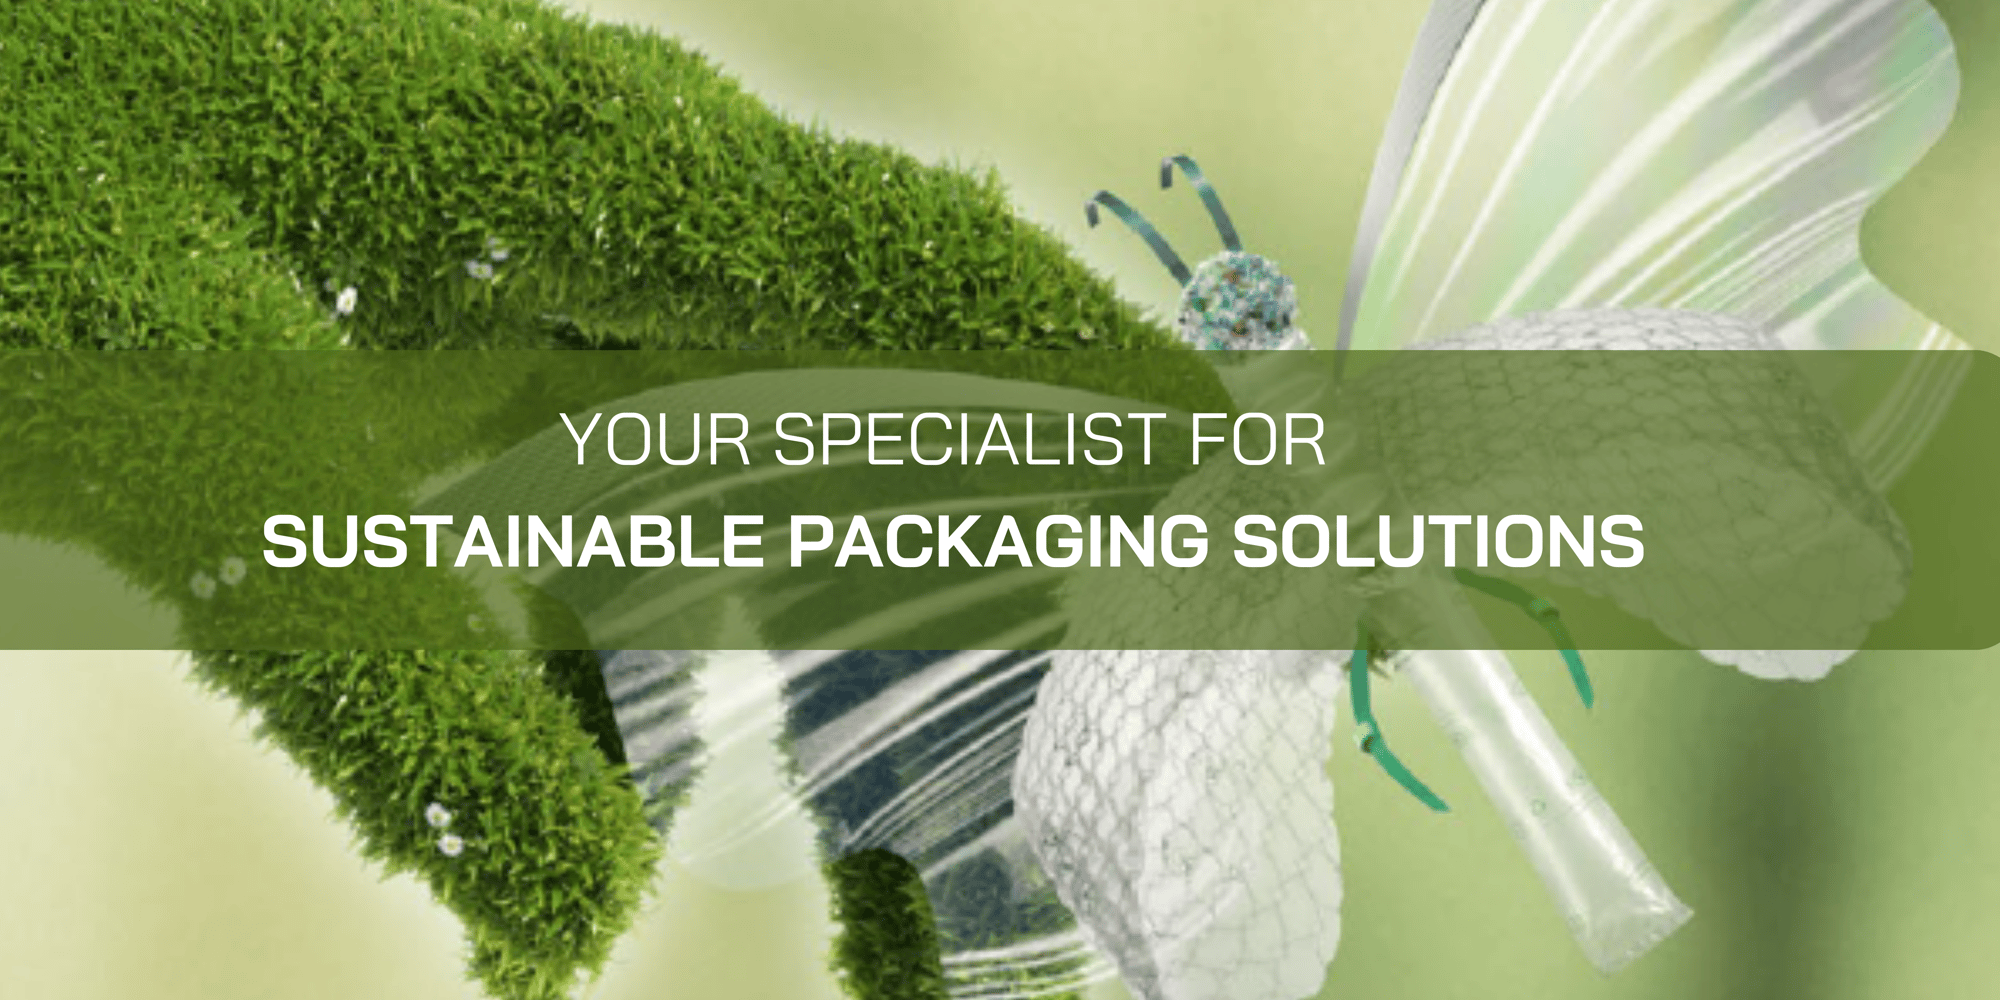 YOUR SPECIALIST FOR SUSTAINABLE PACKAGING SOLUTIONS